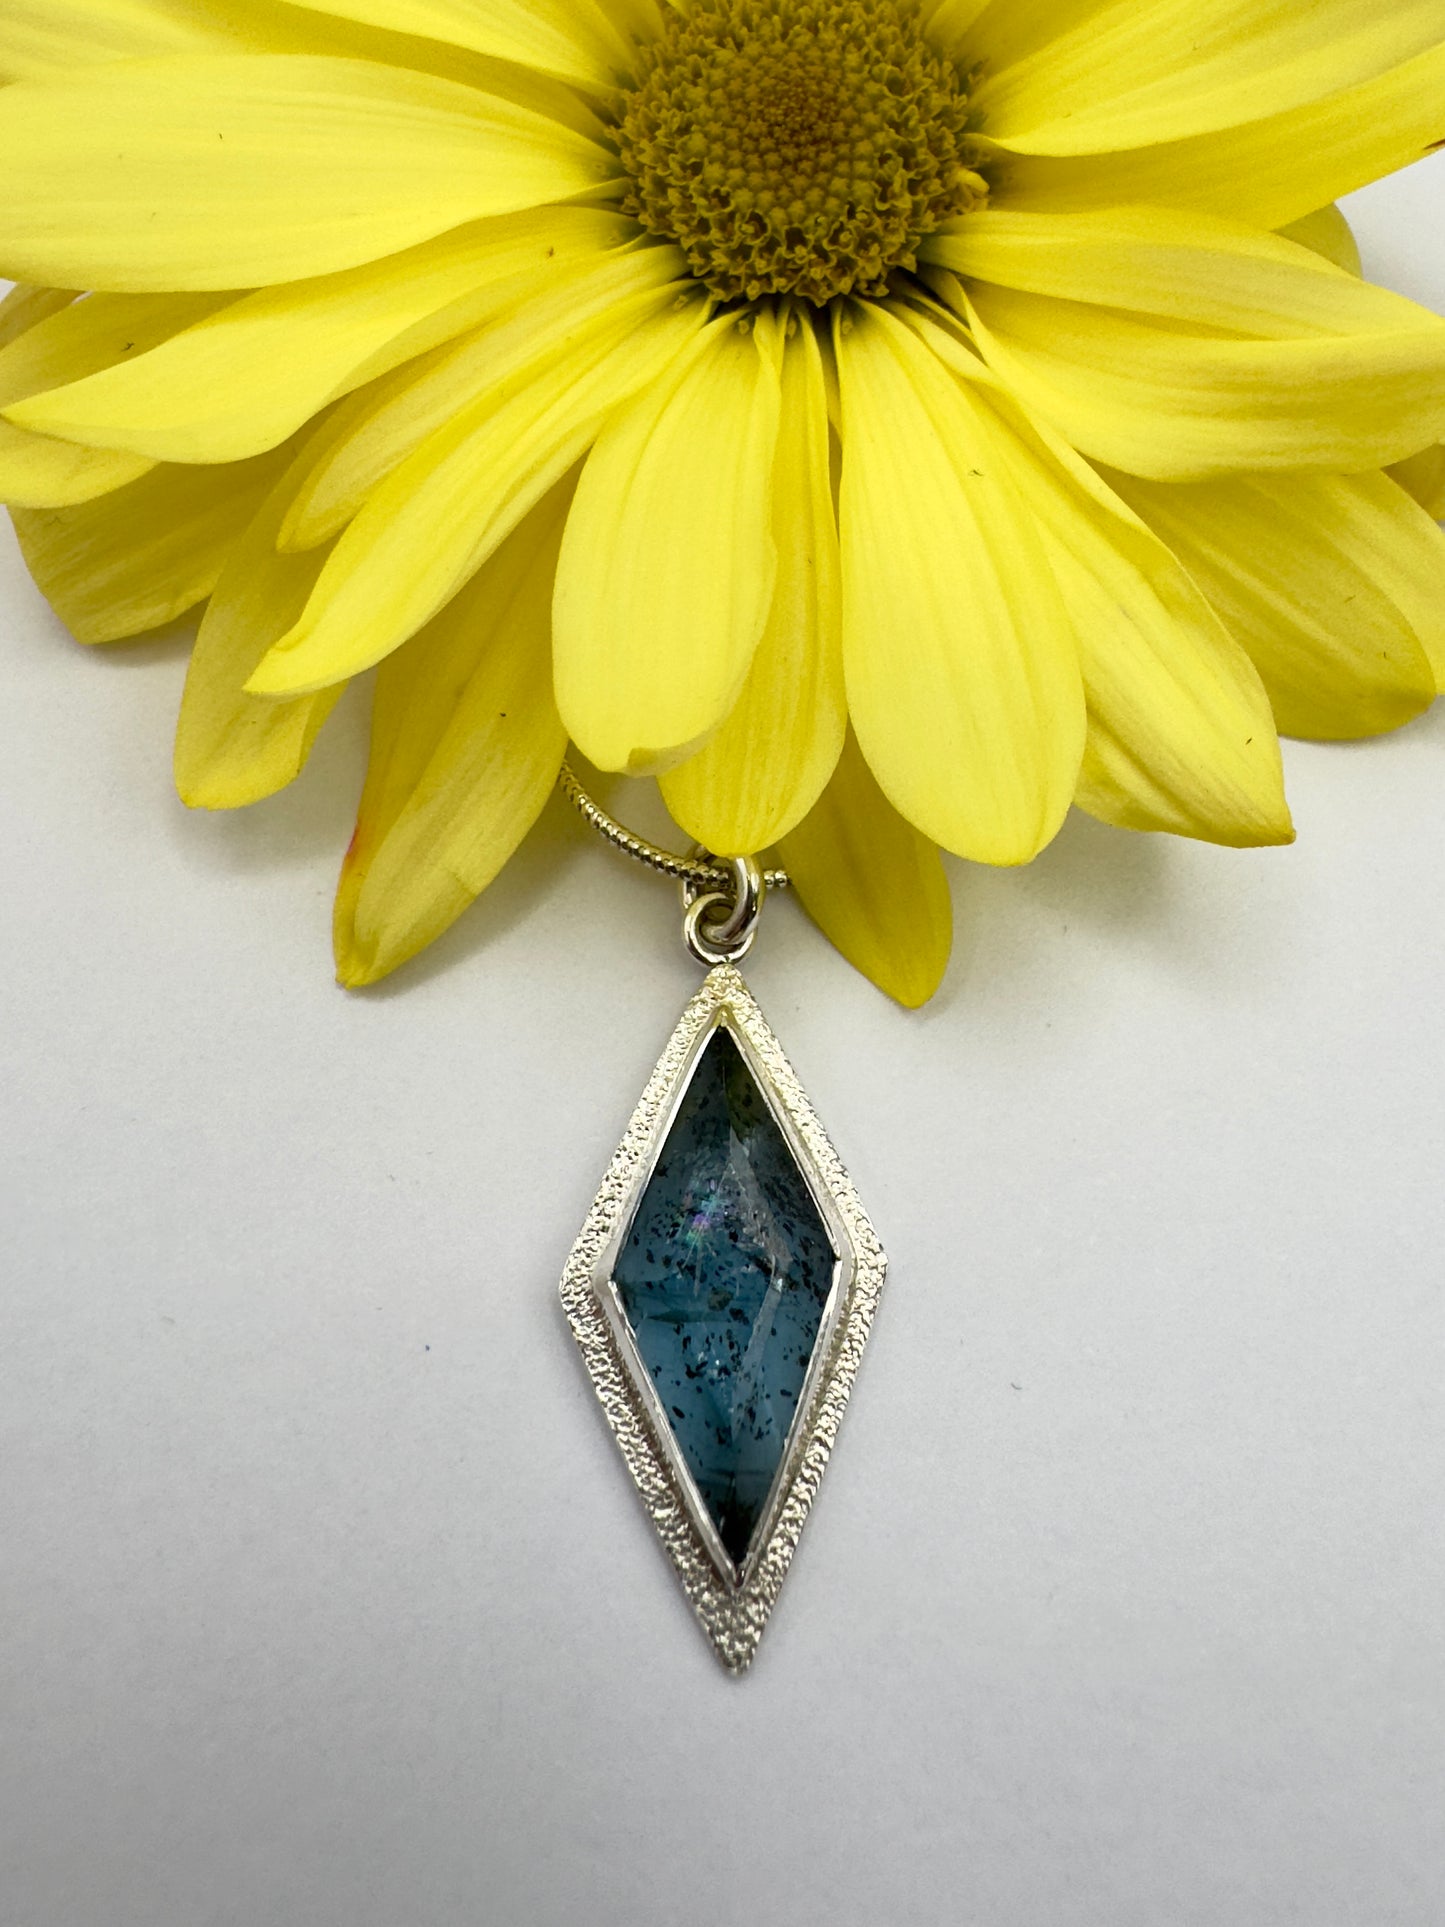 Elegance in Teal: Kyanite Necklace in Sterling and Fine Silver